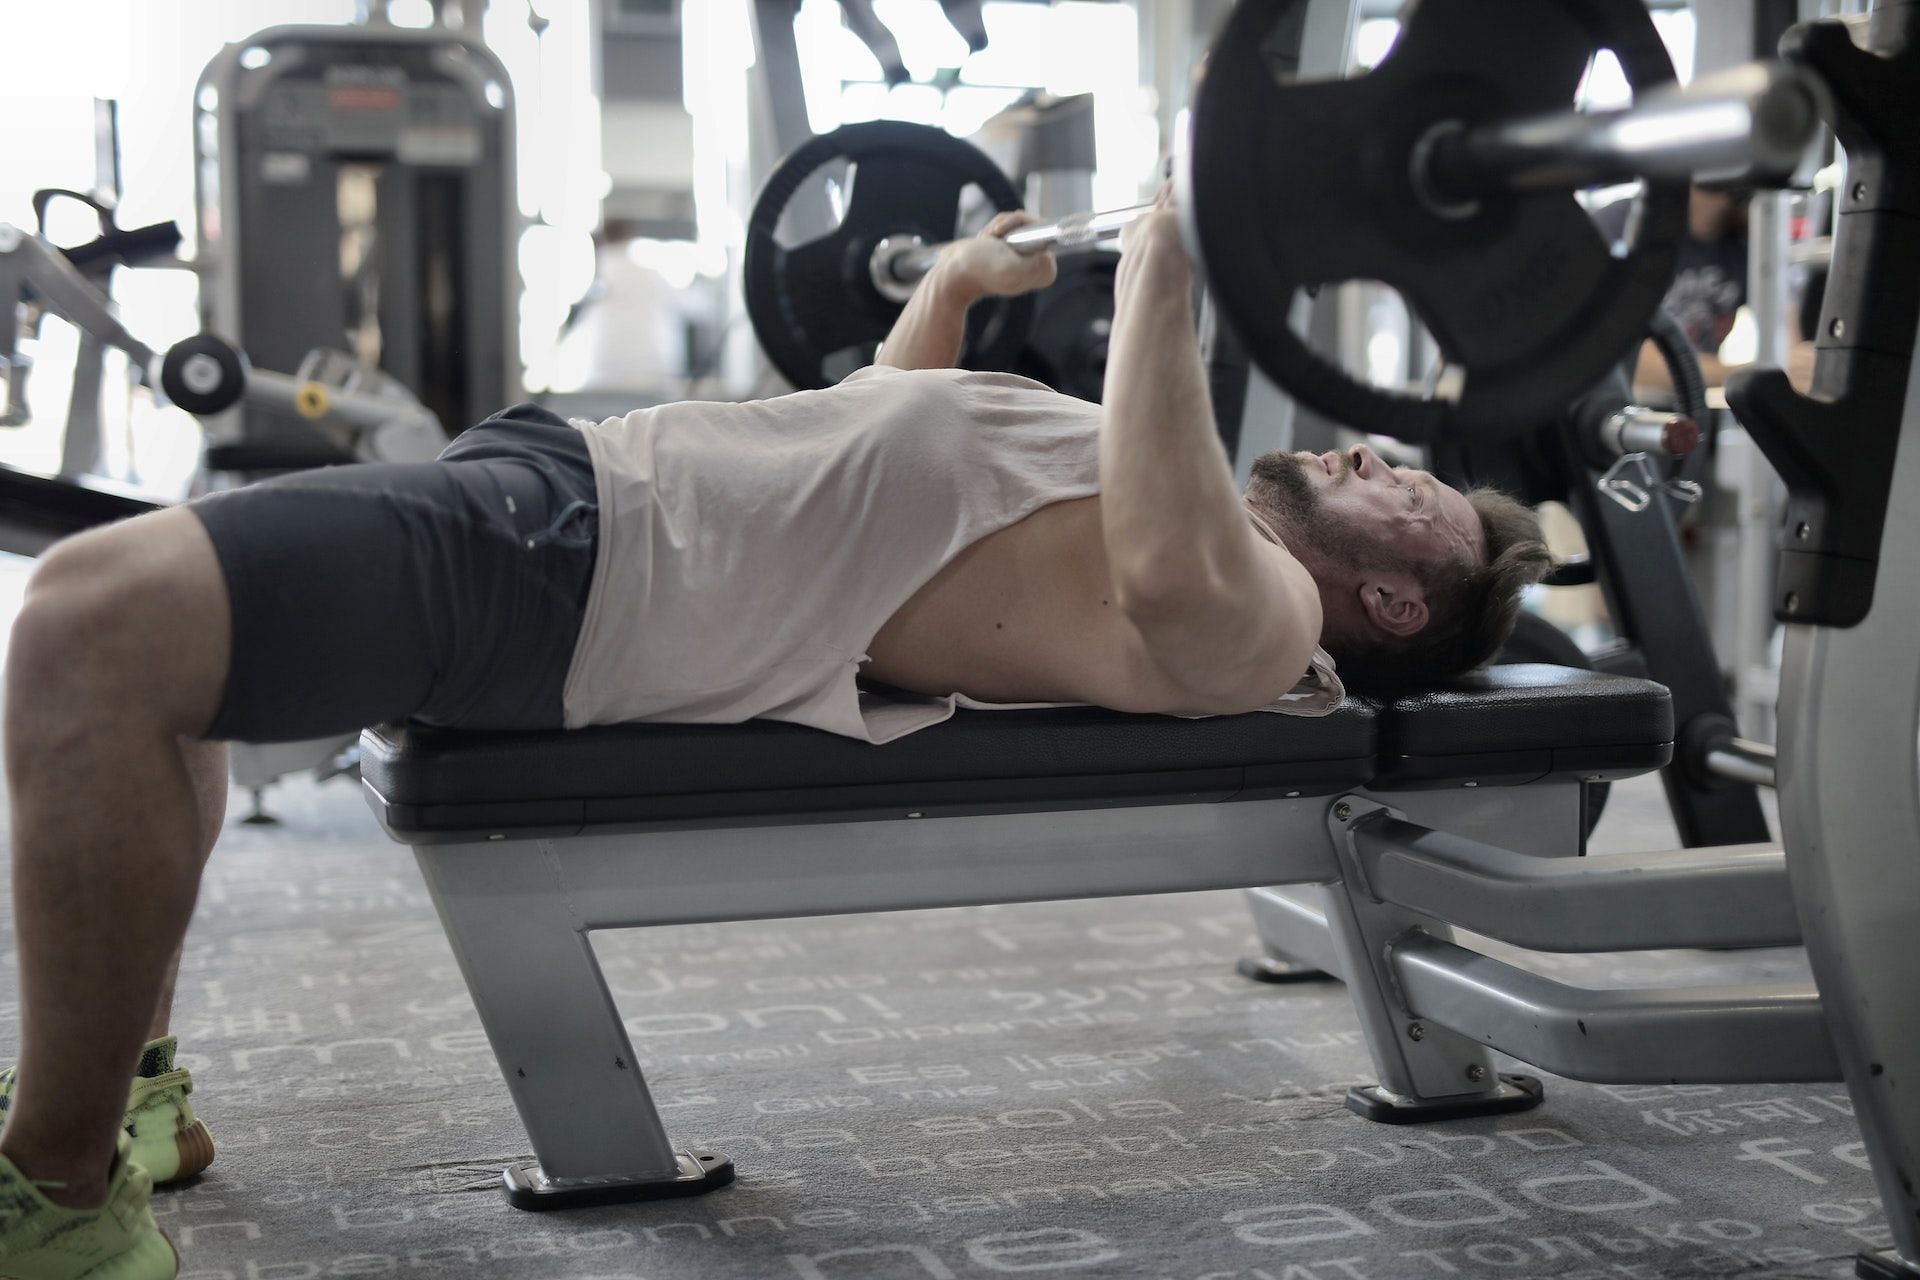 It&#039;s one of the best gym full chest workouts. (Photo via Pexels/Photo by Andrea Piacquadio)